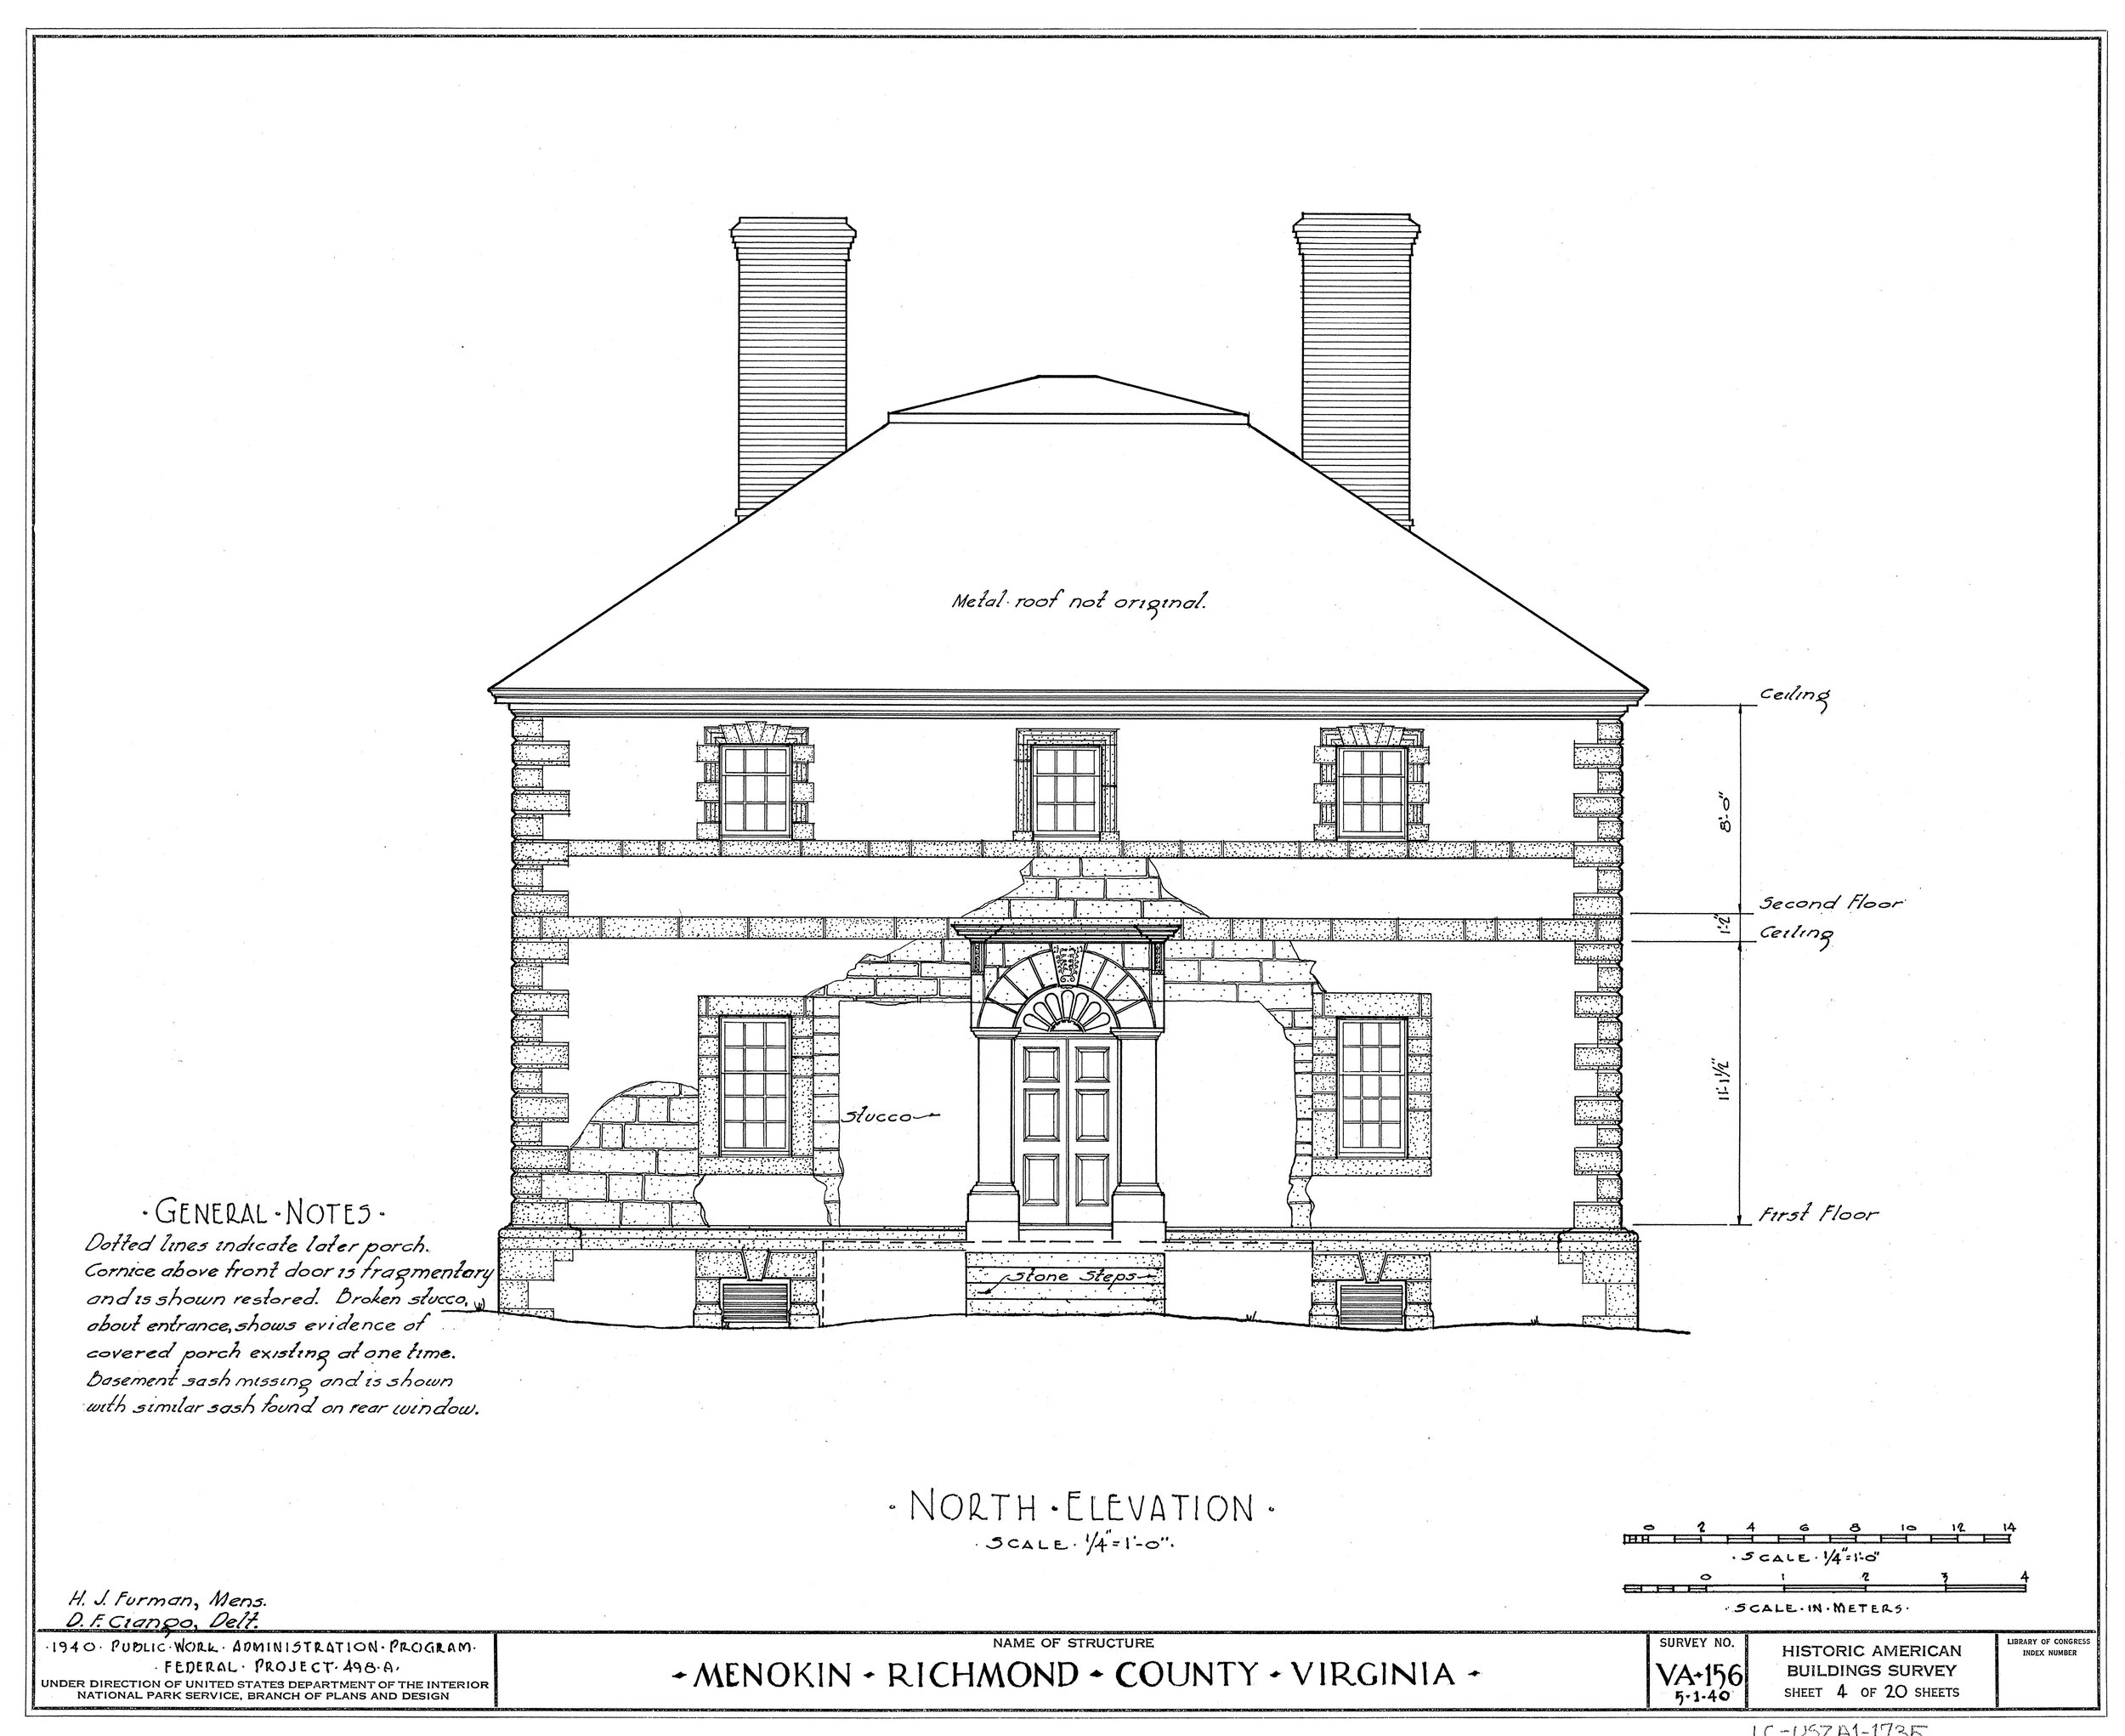 3 - HABS Drawing - Front of House.jpg